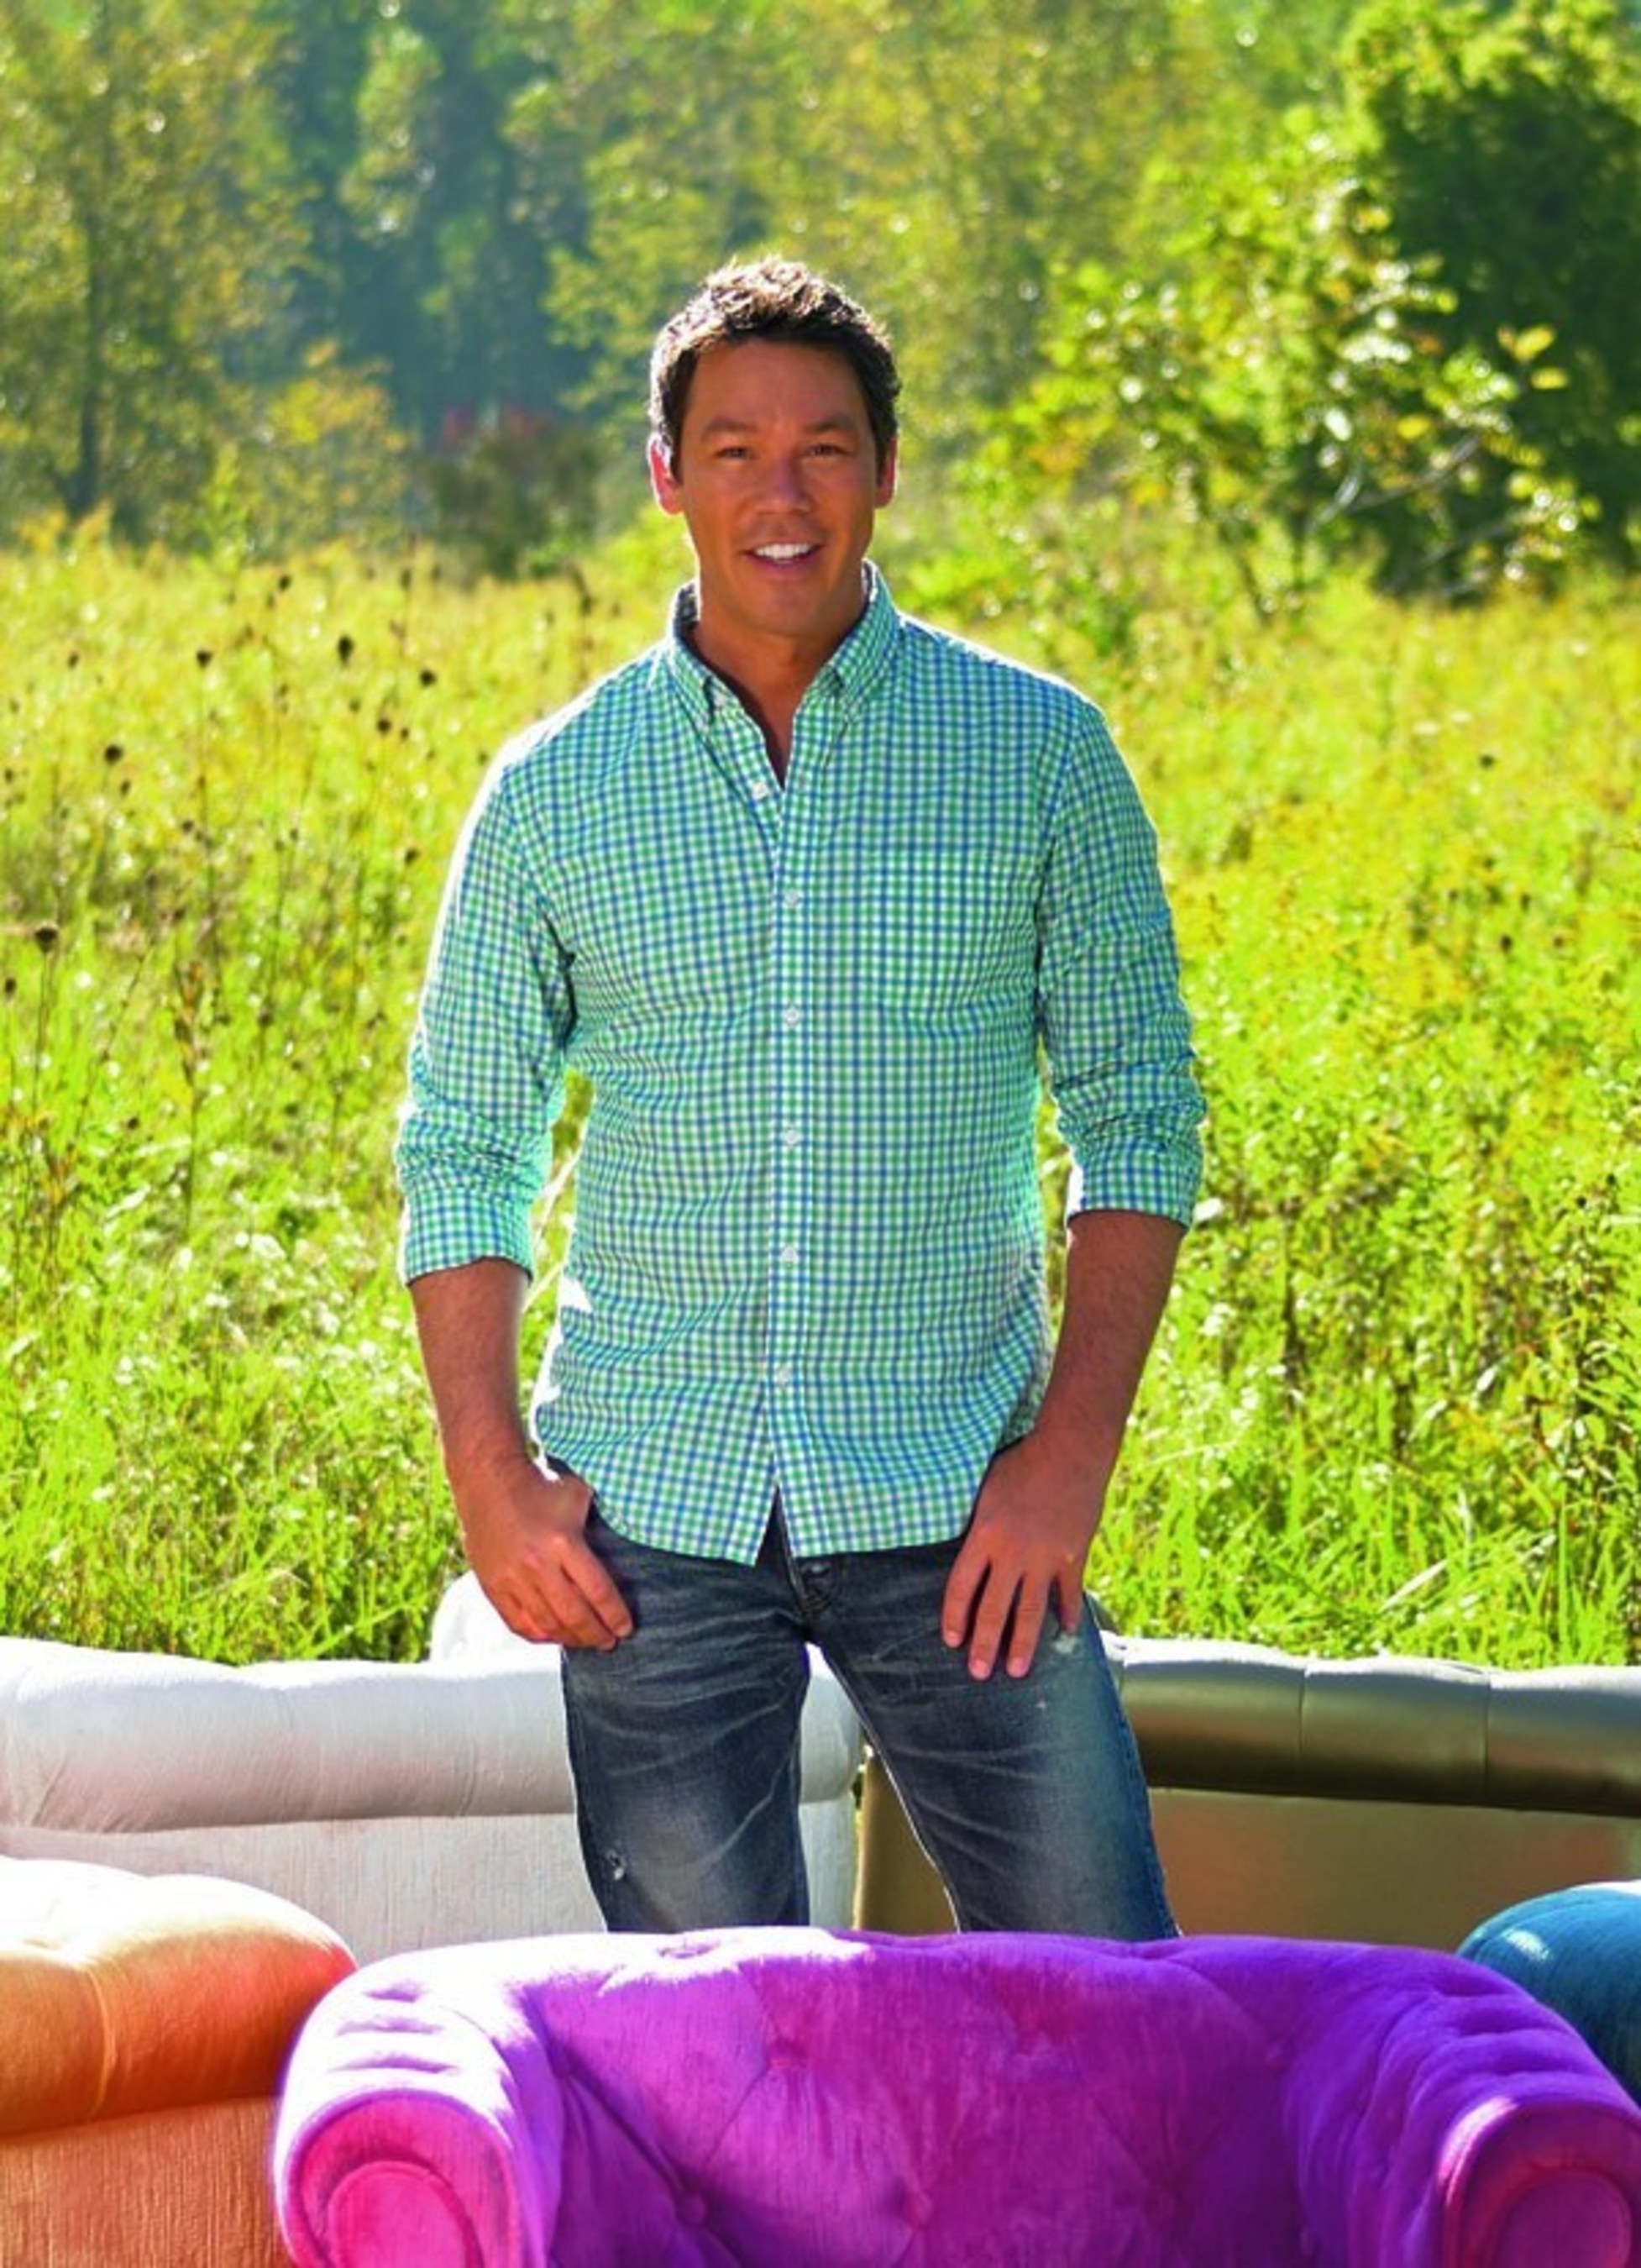 Grandin Road announces its new partnership with HGTV host and design star David Bromstad to launch David Bromstad Home by Grandin Road.